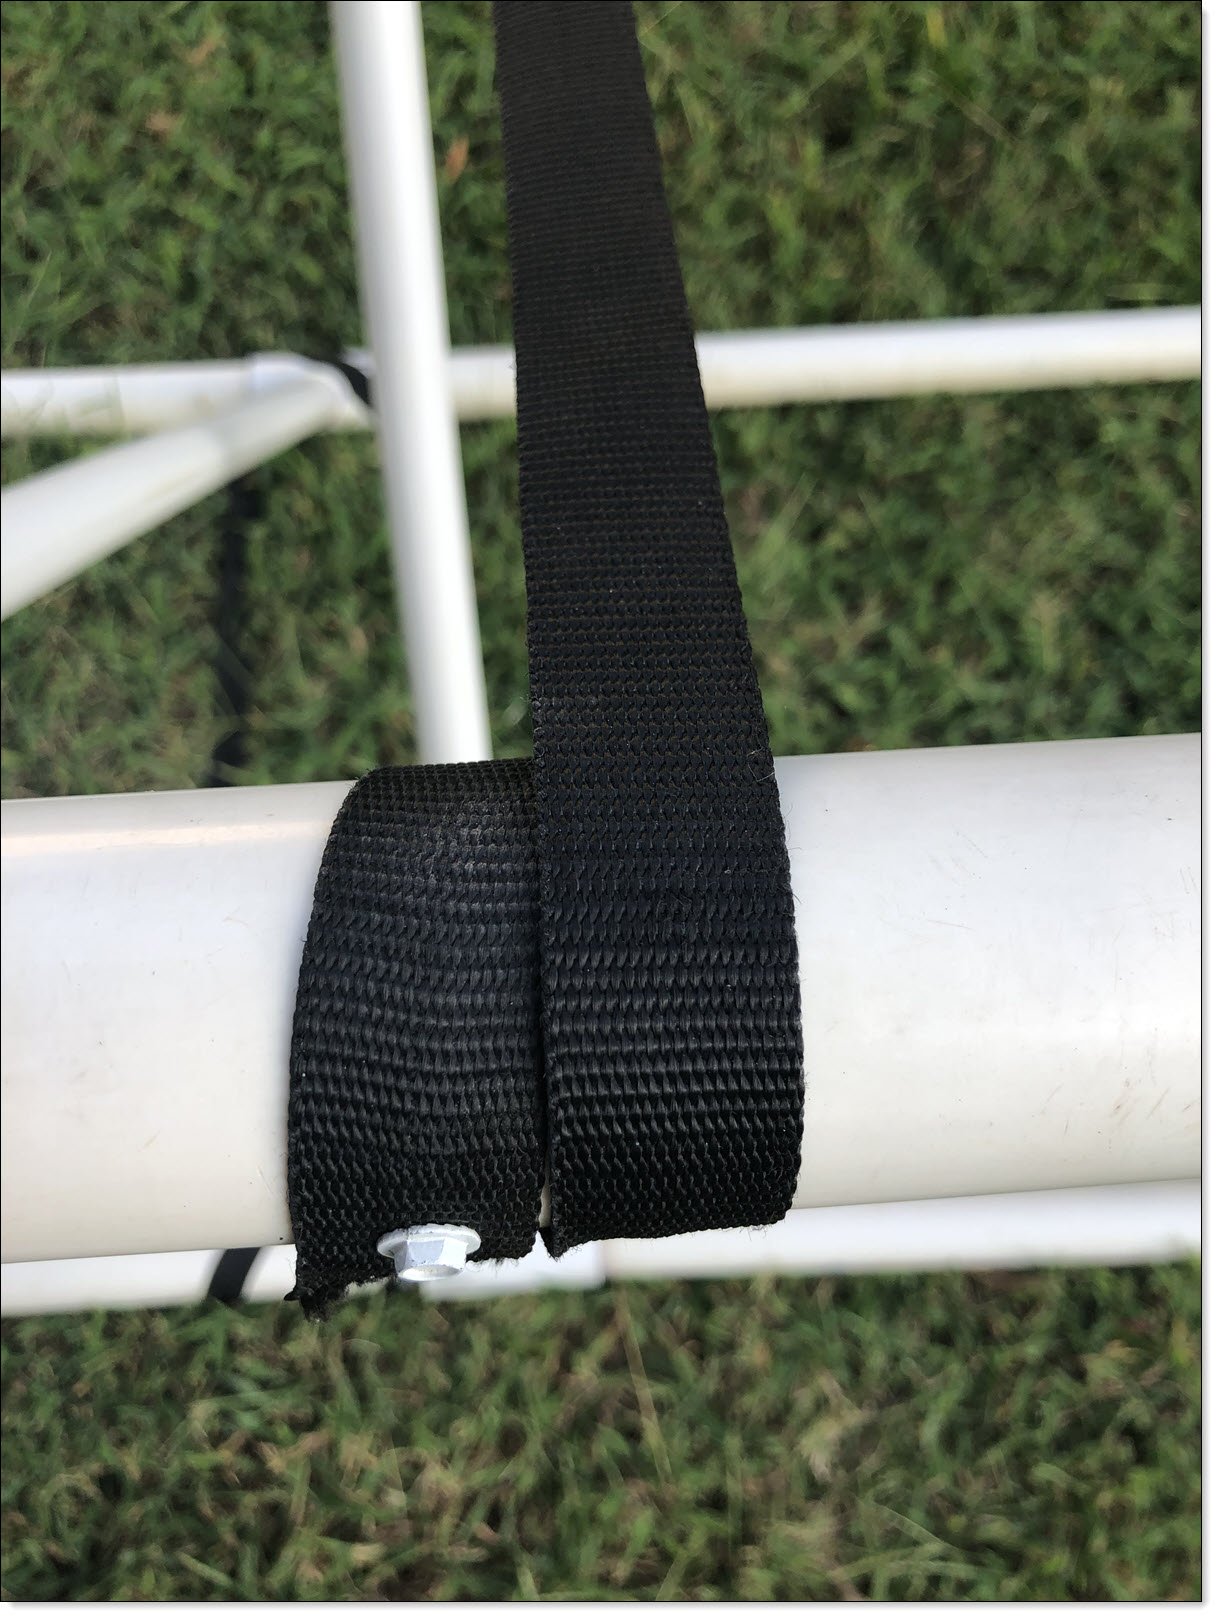 Detail of Nylon Strap Wrapping